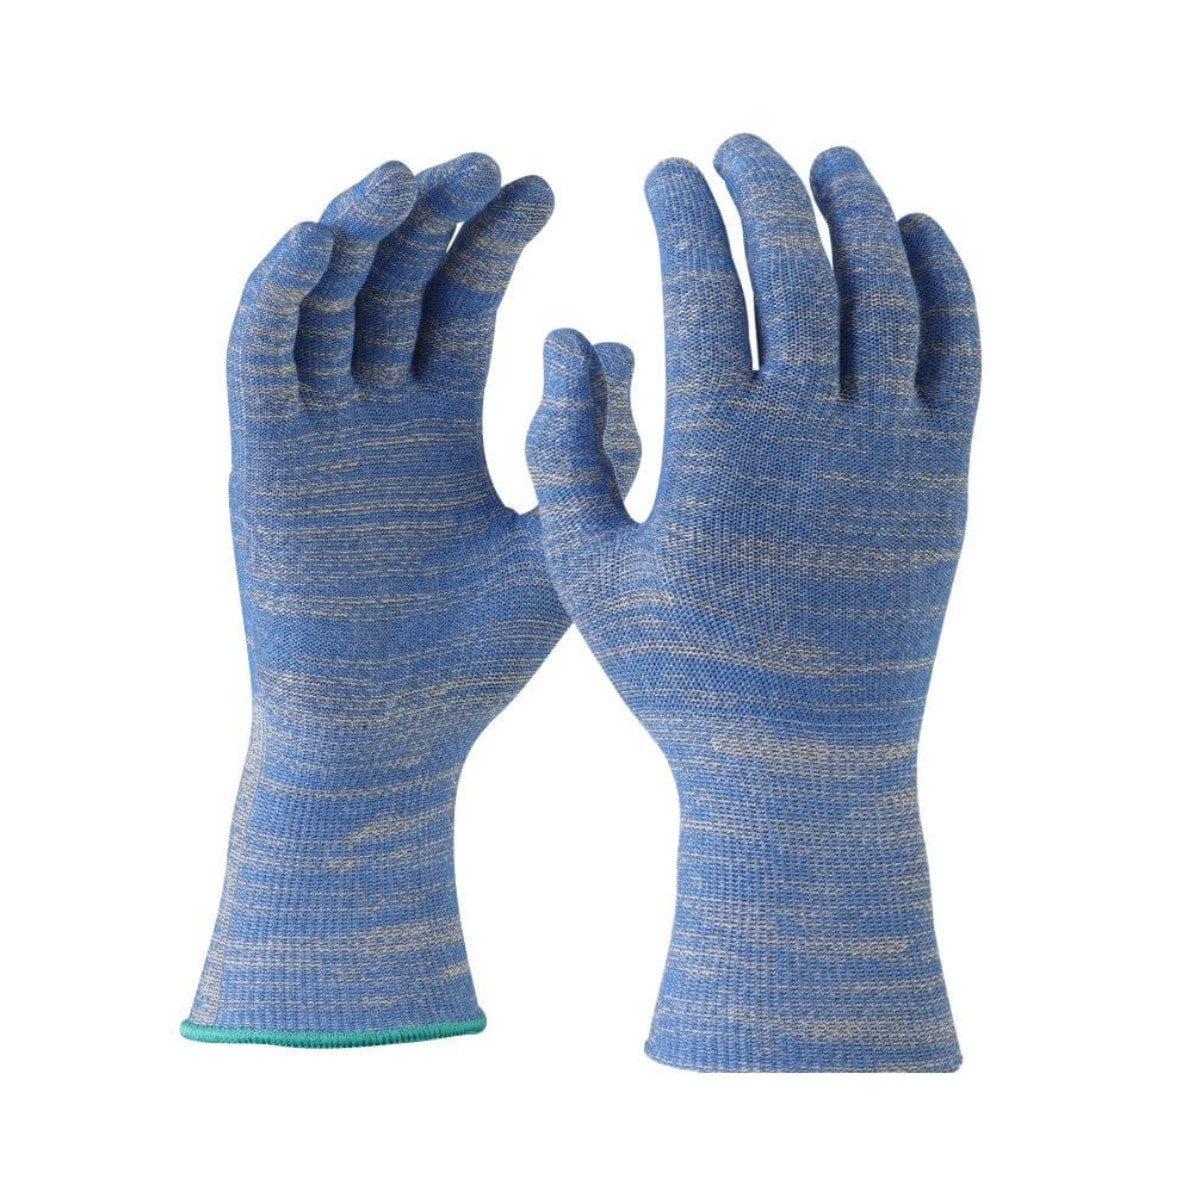 Maxisafe Microfresh Cut E Blue 'Food Grade' Liner Glove GKB167 (Pack of 6 Pairs)